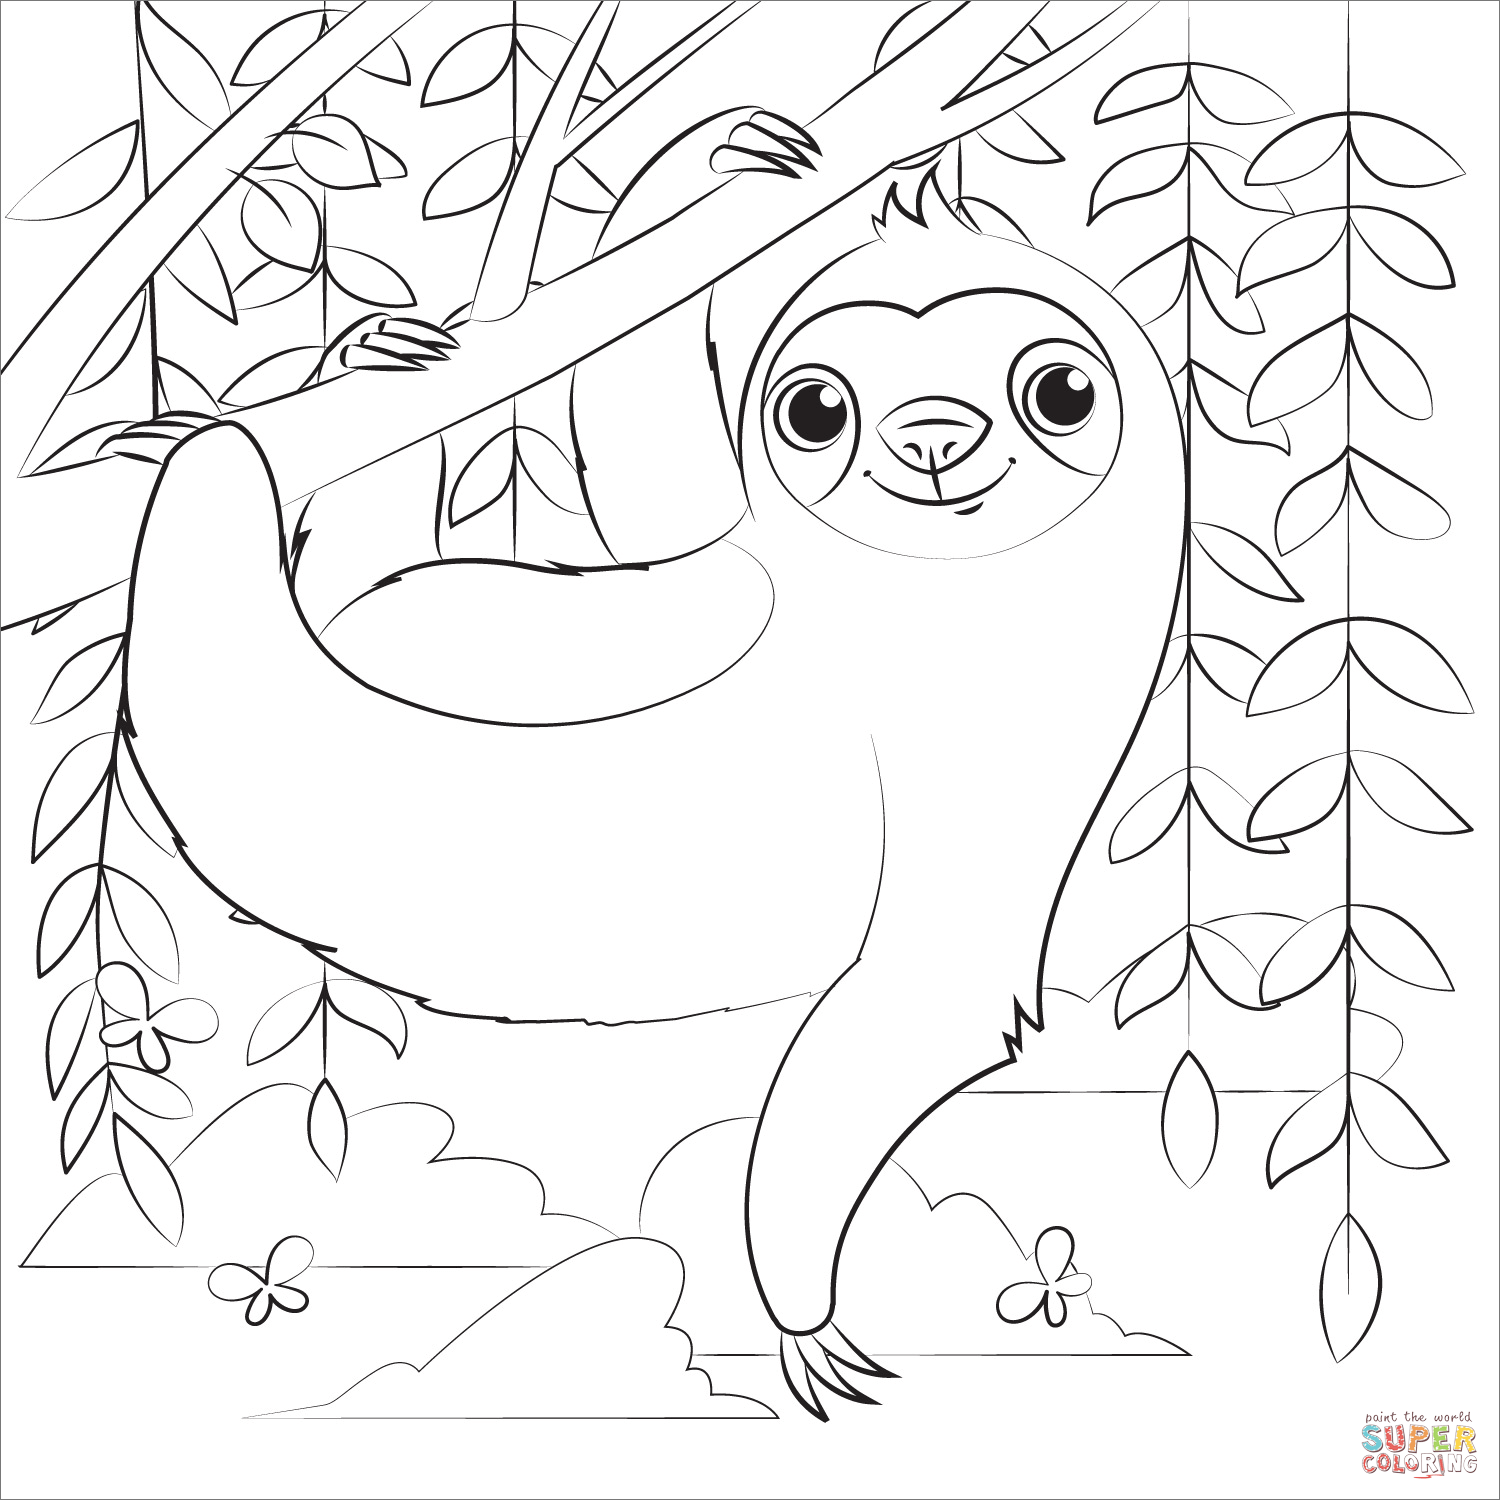 Sloth coloring page free printable coloring pages